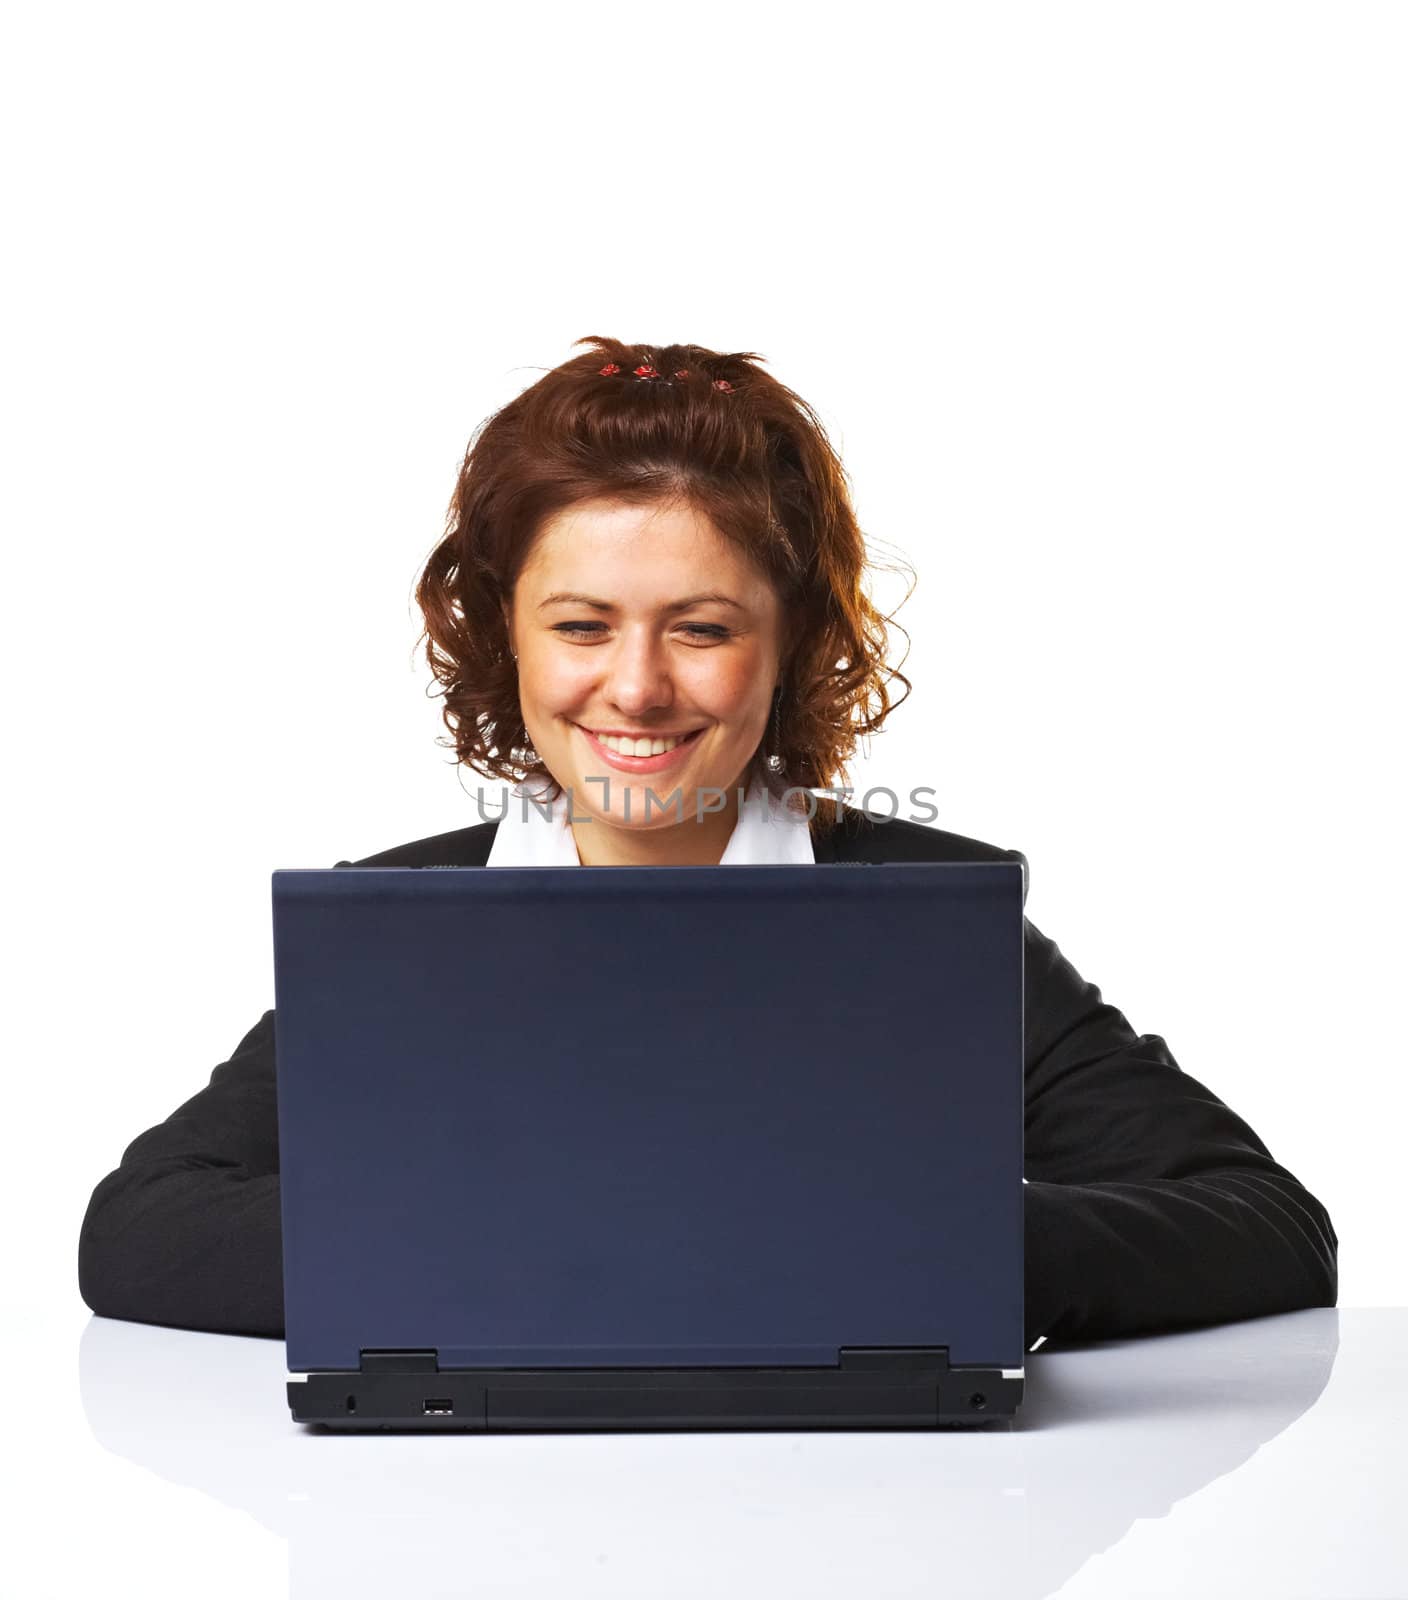 A Happy successful business woman smiling while working on laptop